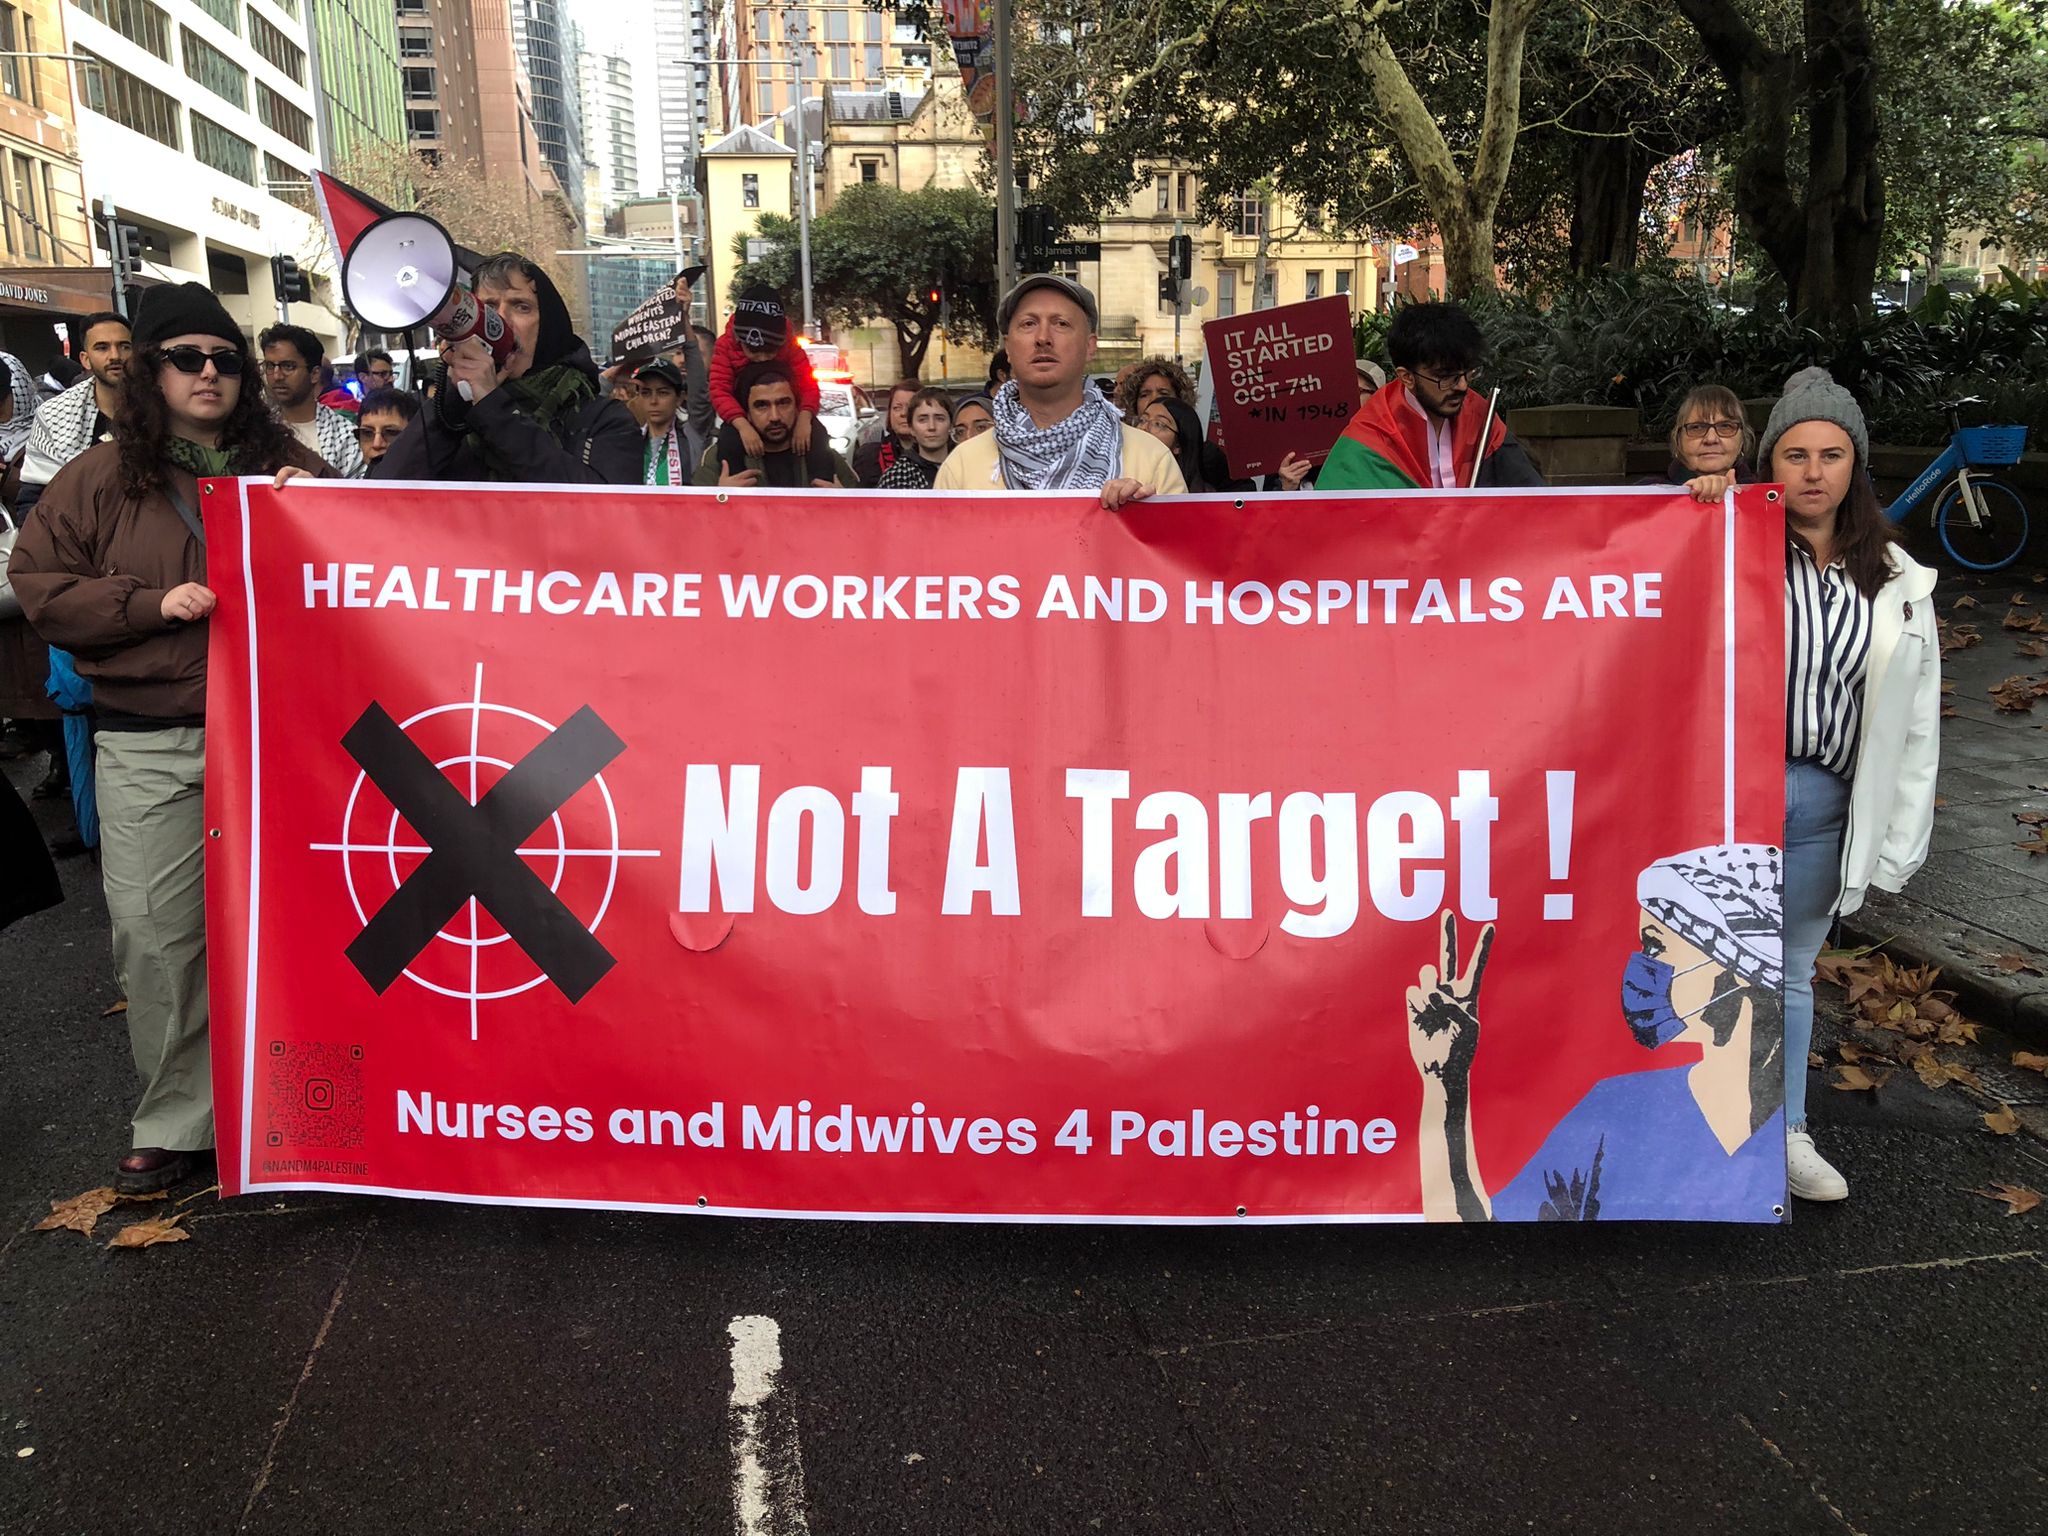 Nurses and midwives for palestine